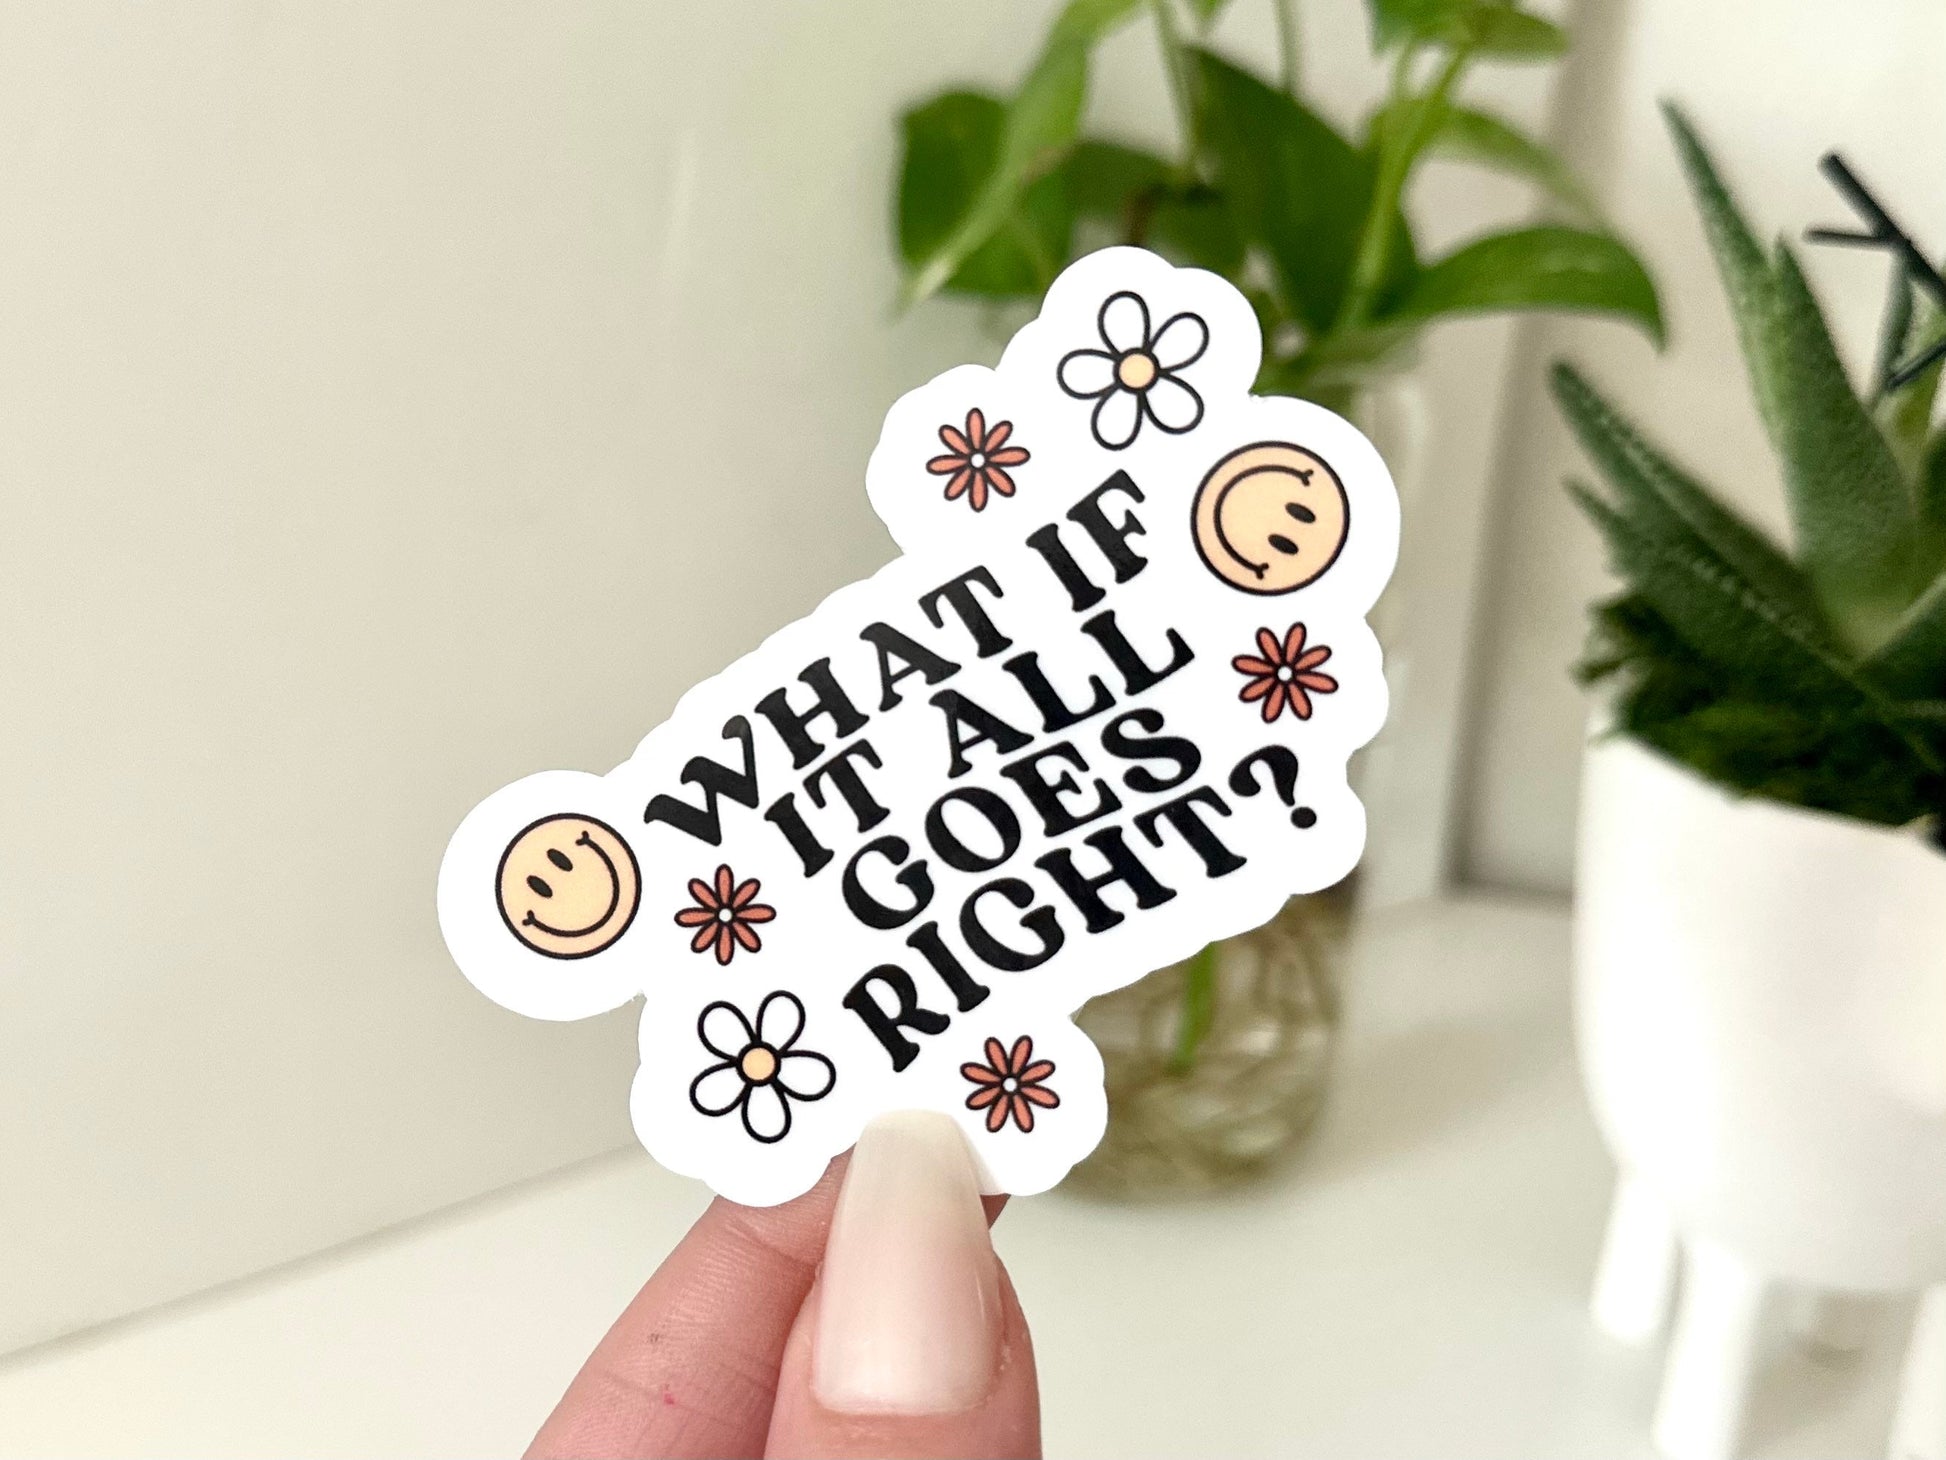 What If It All Goes Right Waterproof Sticker, Mental Health Stickers, Therapist Gifts, Therapy Art, Waterbottle Sticker